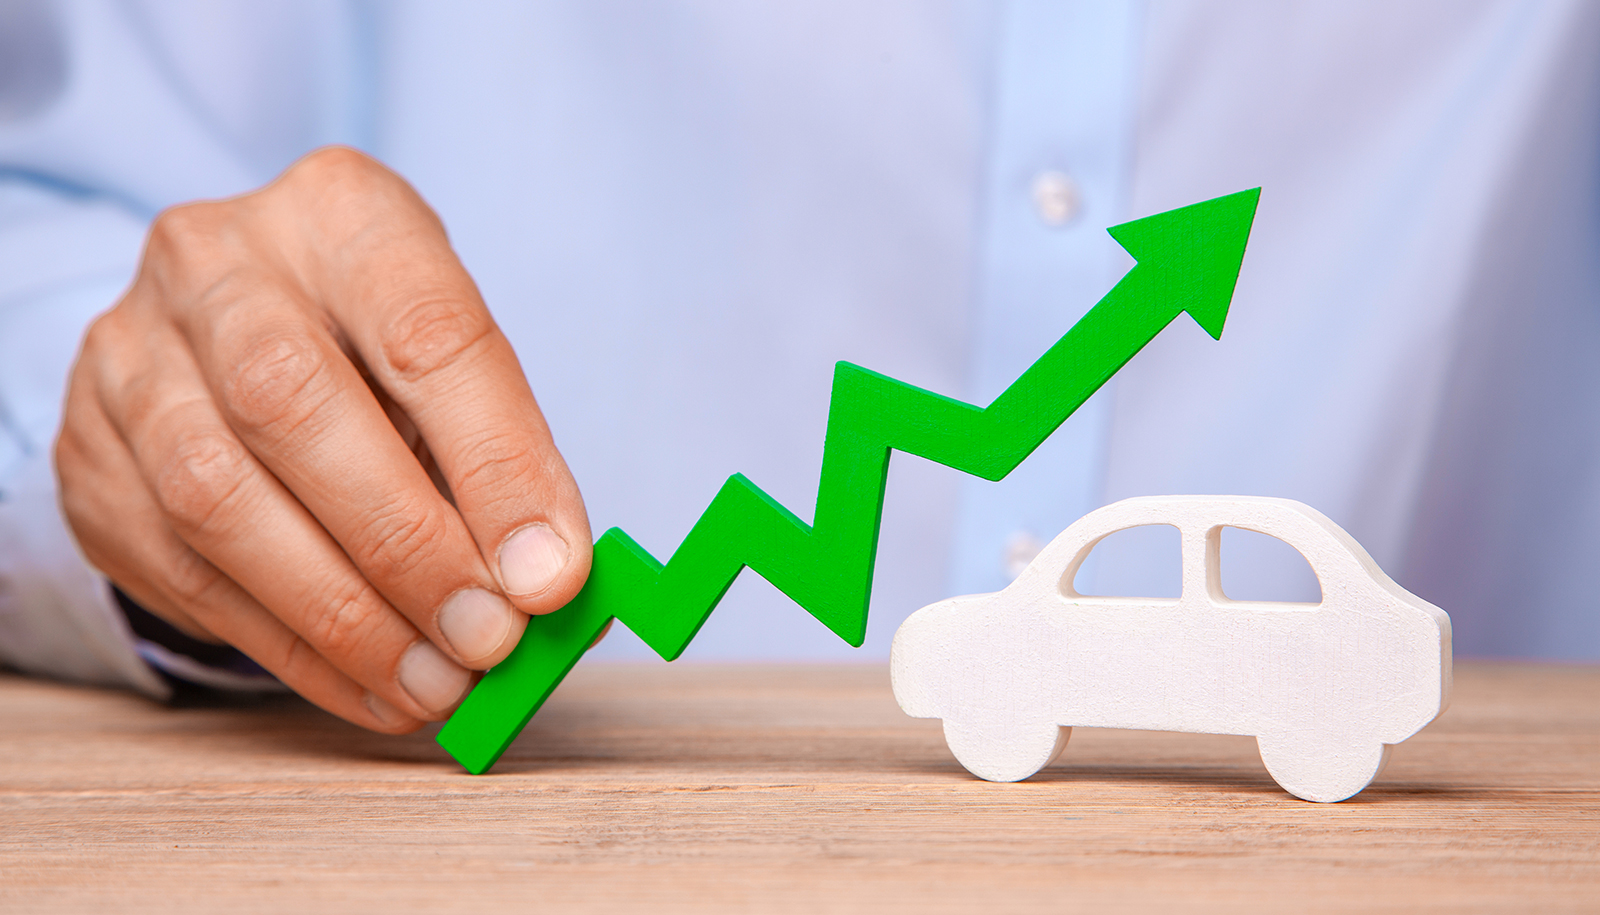 Car insurance premiums continue to increase